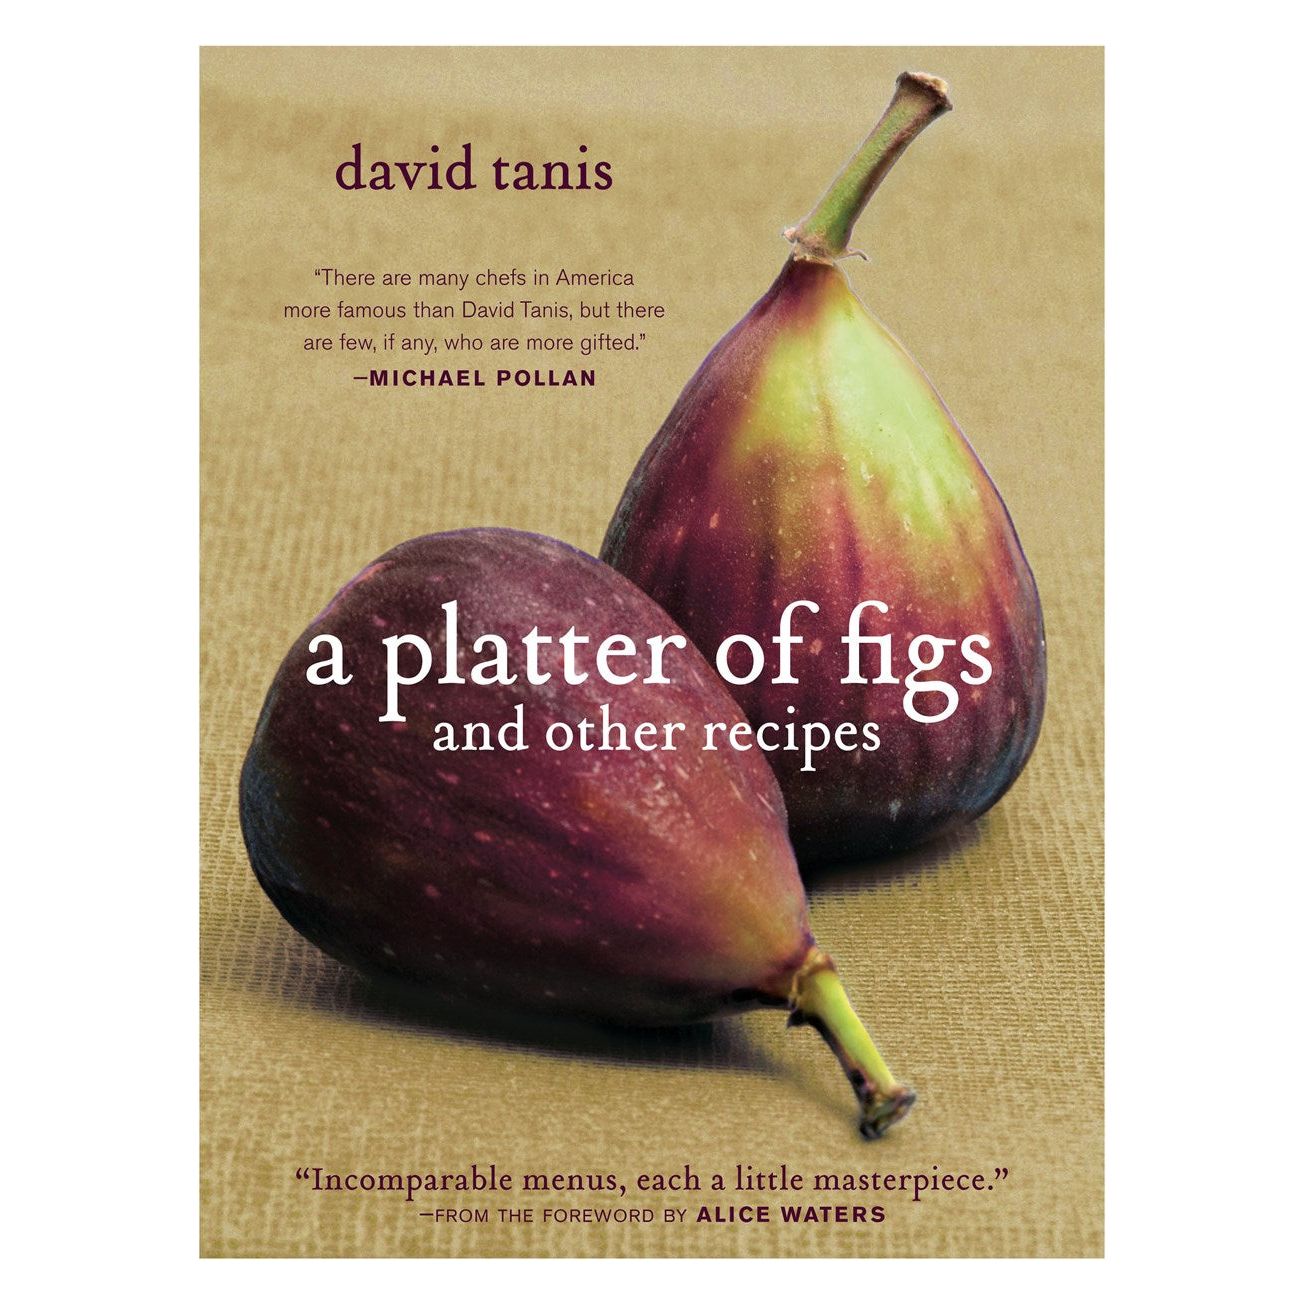 A Platter of Figs and Other Recipes (David Tanis)